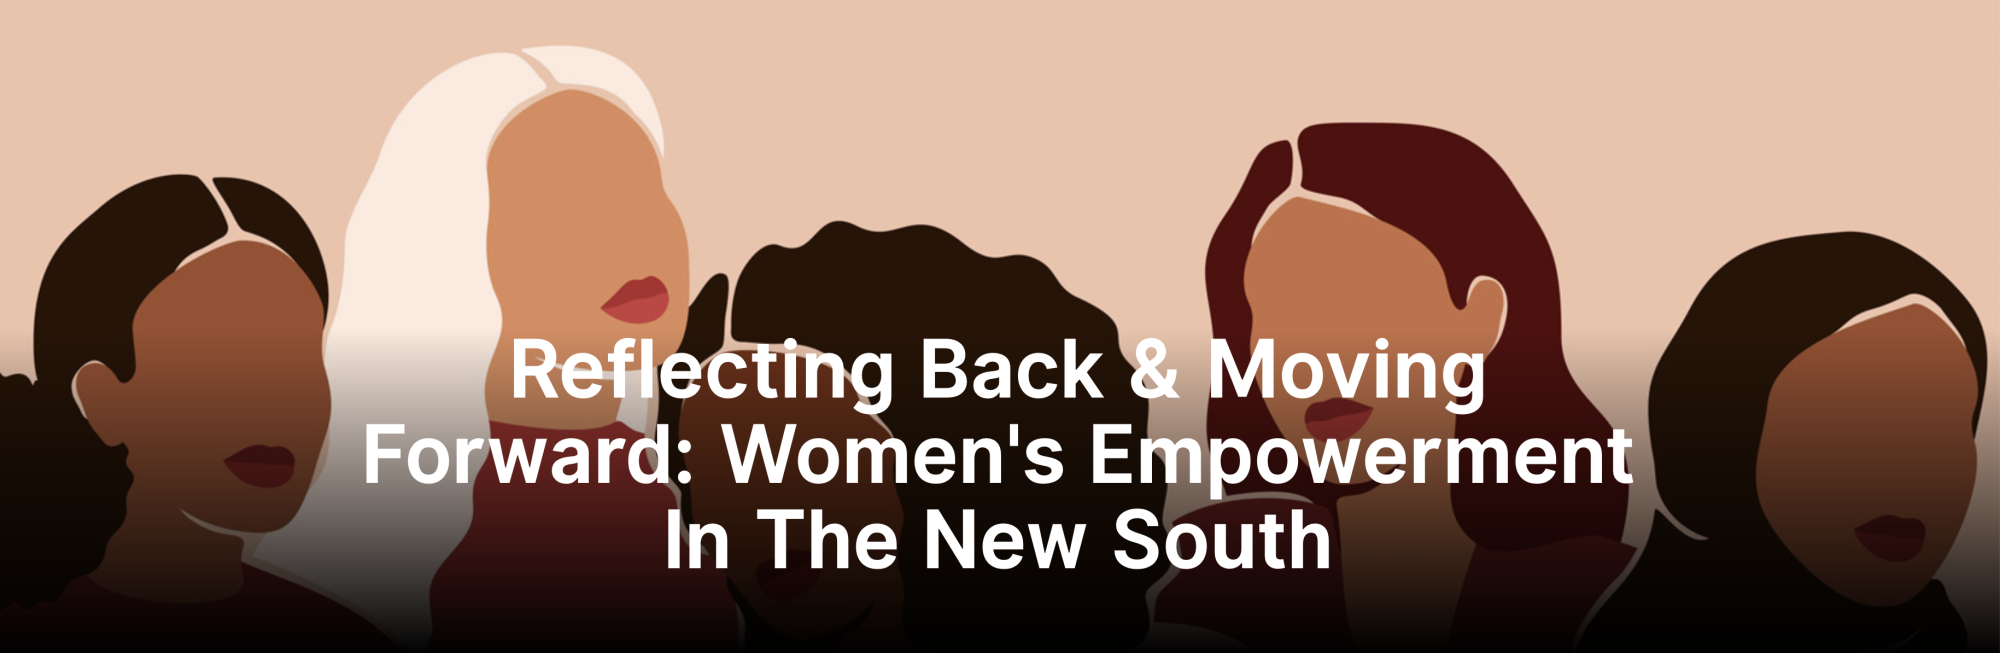 Reflect Back and Moving Forward: Women's Empowerment in the New South